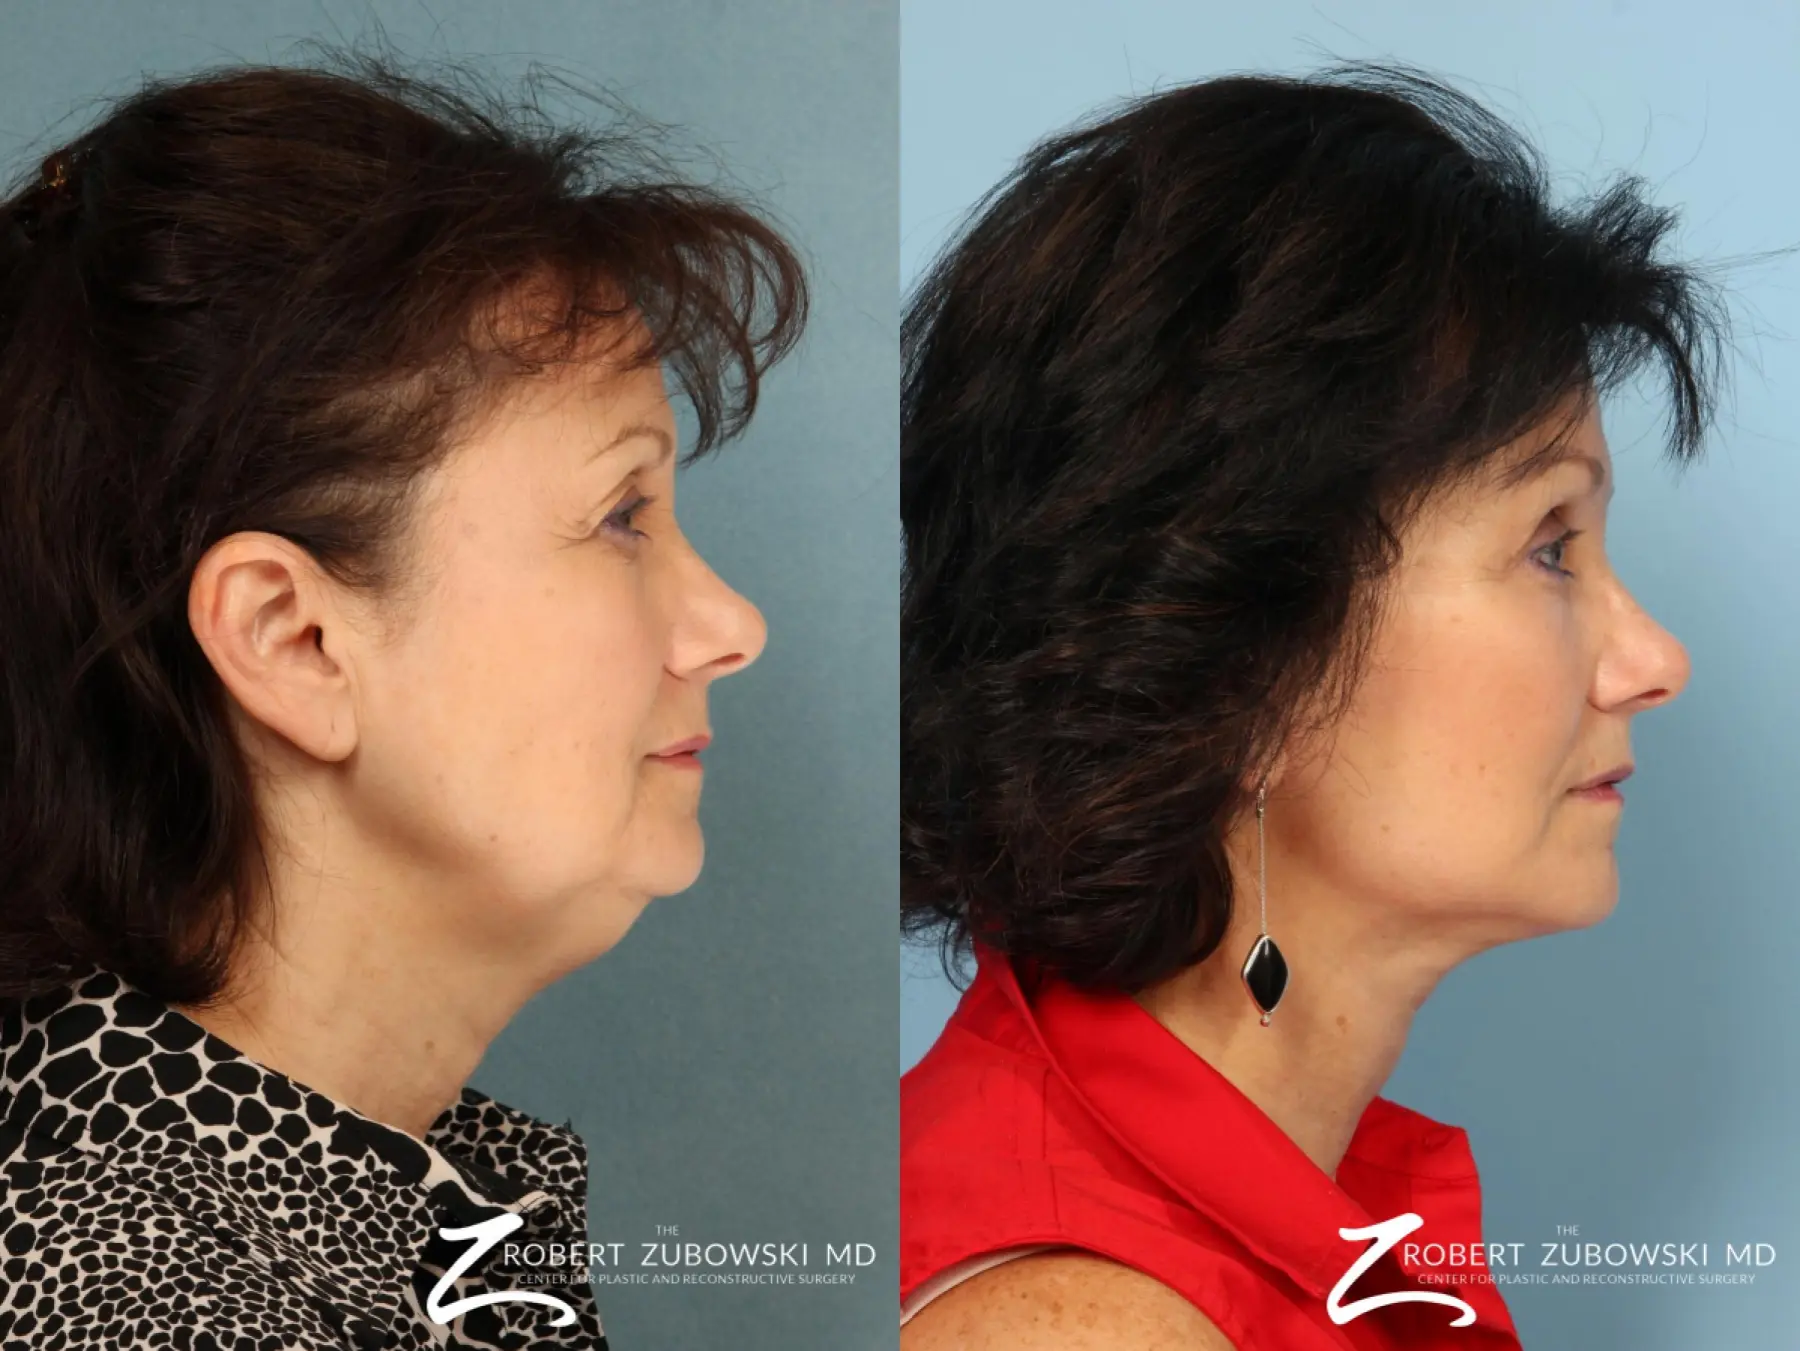 Blepharoplasty: Patient 4 - Before and After 2